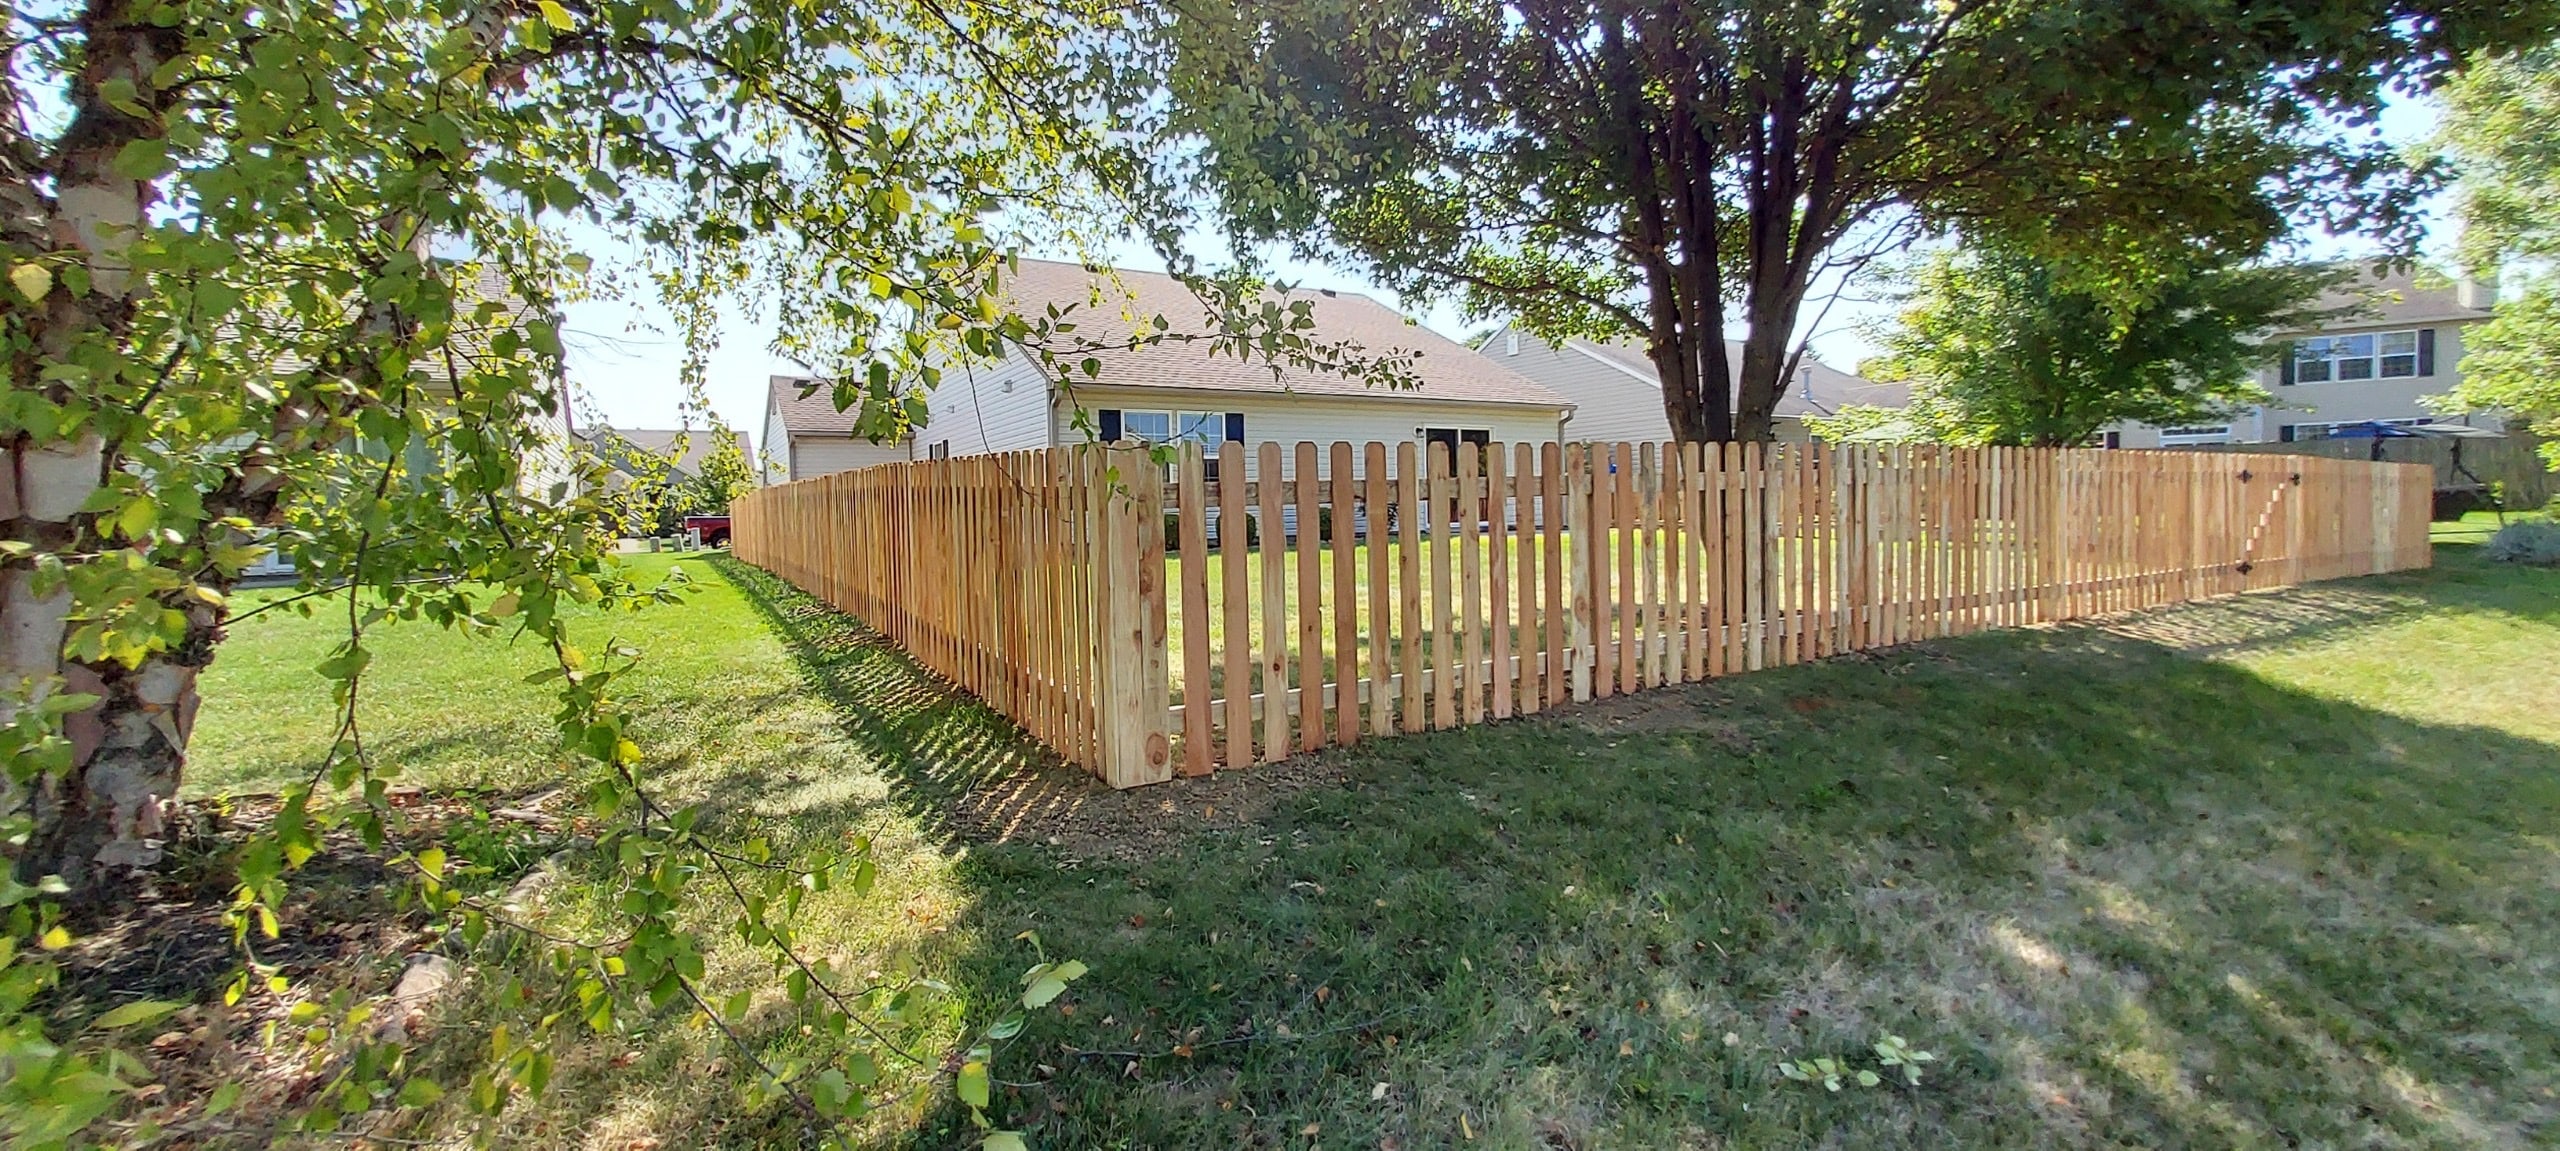 Wood Fence Property Installation Services in Indianapolis